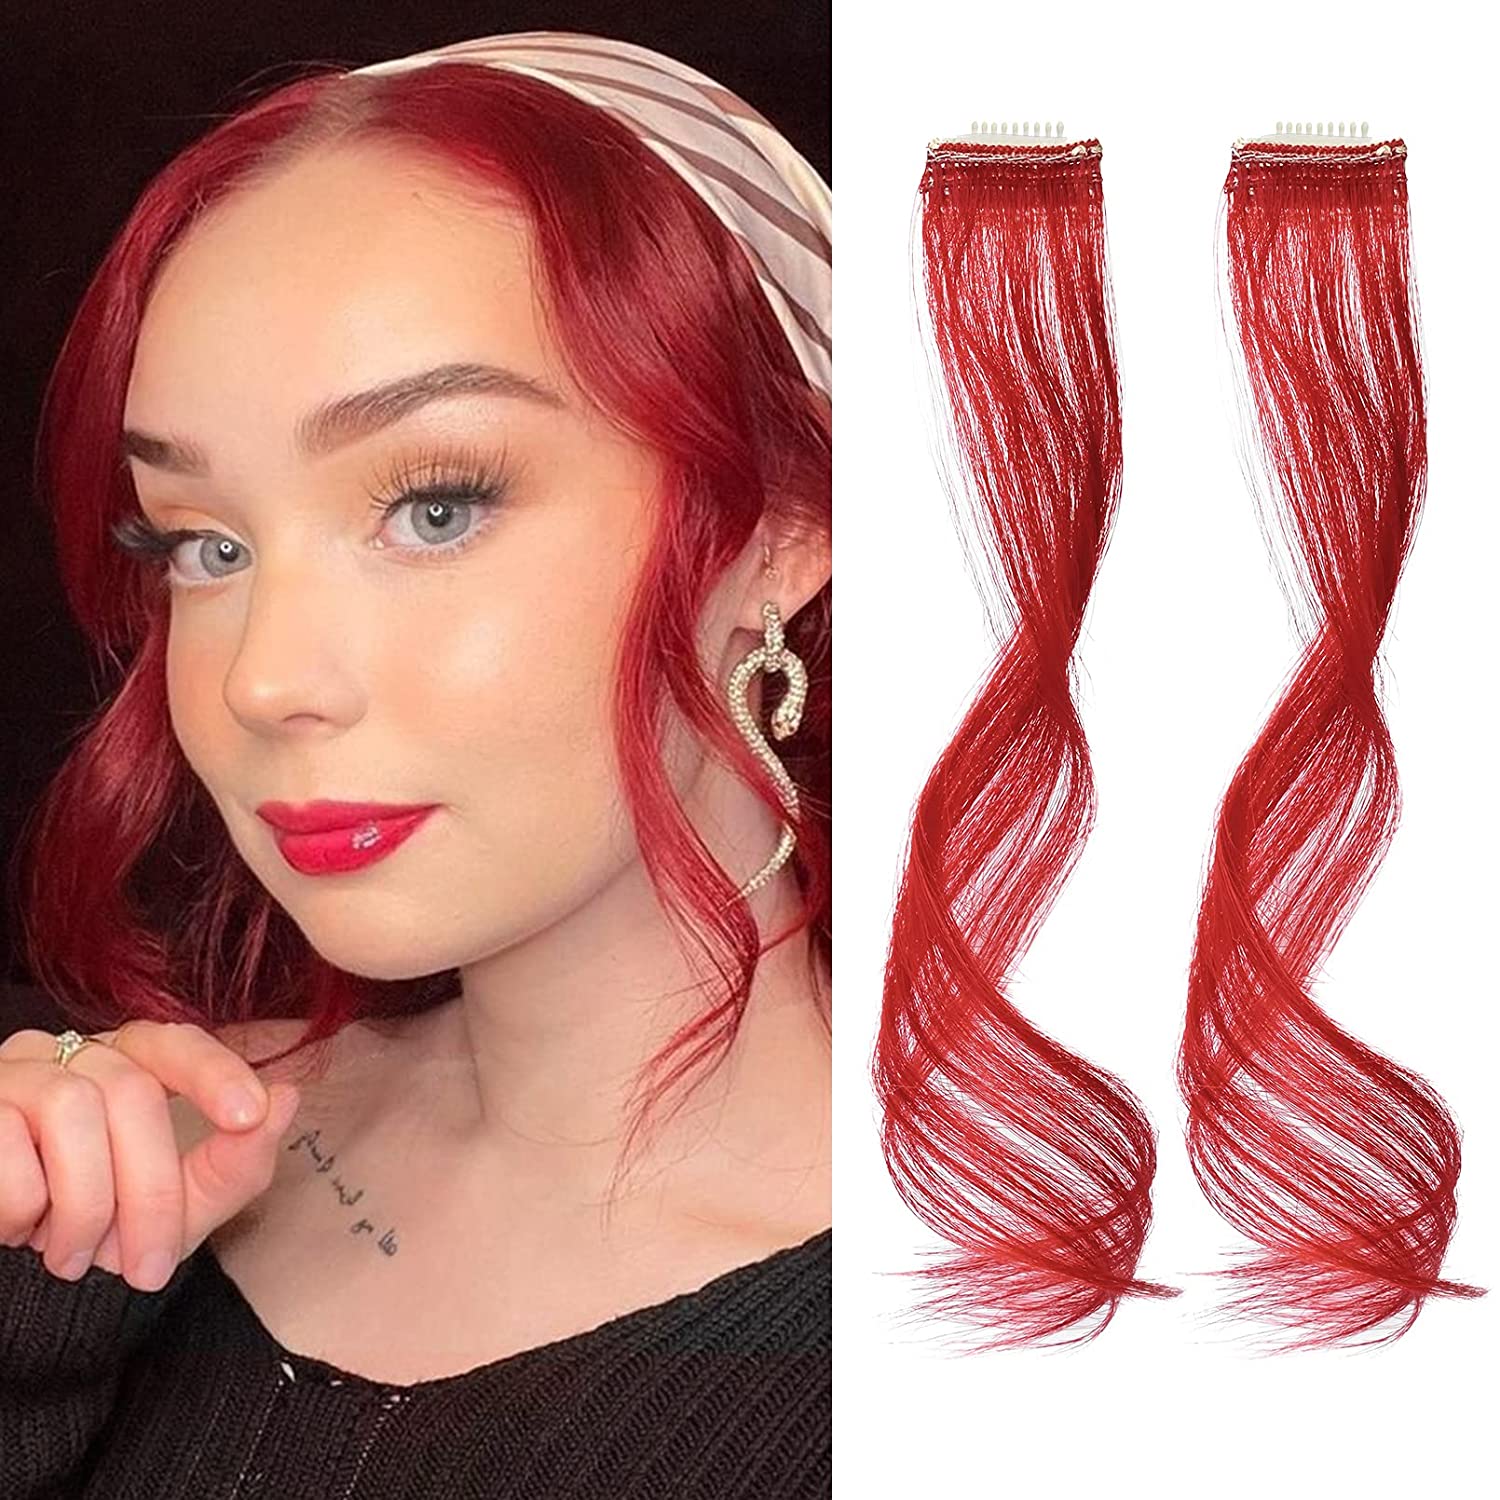 REECHO Long Side Air Bangs, Wavy Curly Clip in Bangs Front Side Bangs for Women Daily Use 2 PCS Set Long Temples